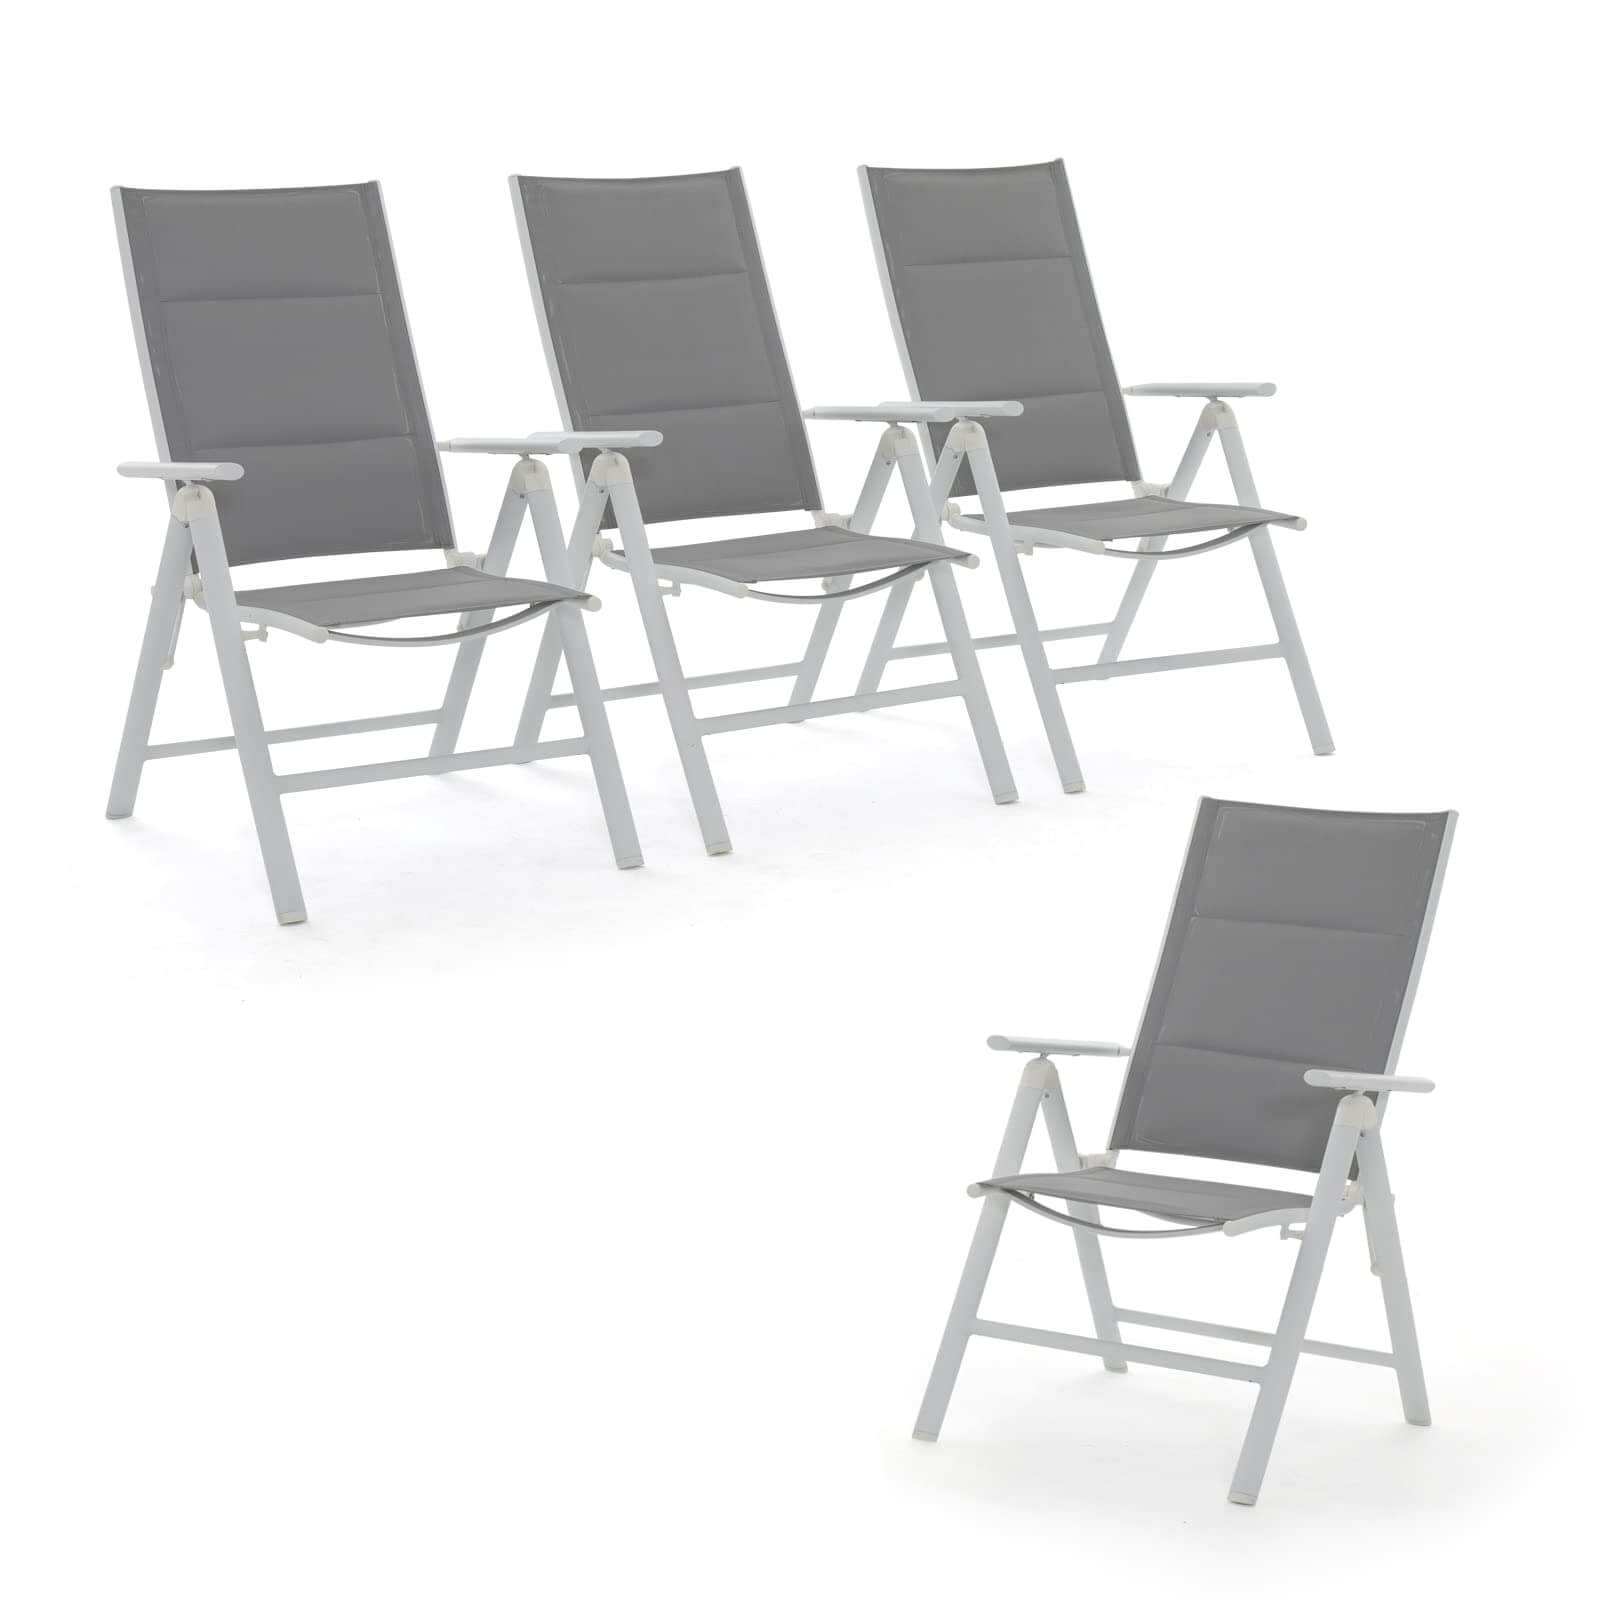 Folding Patio Chairs Set of 4, Aluminum Portable Reclining Lawn Chairs with Adjustable High Backrest